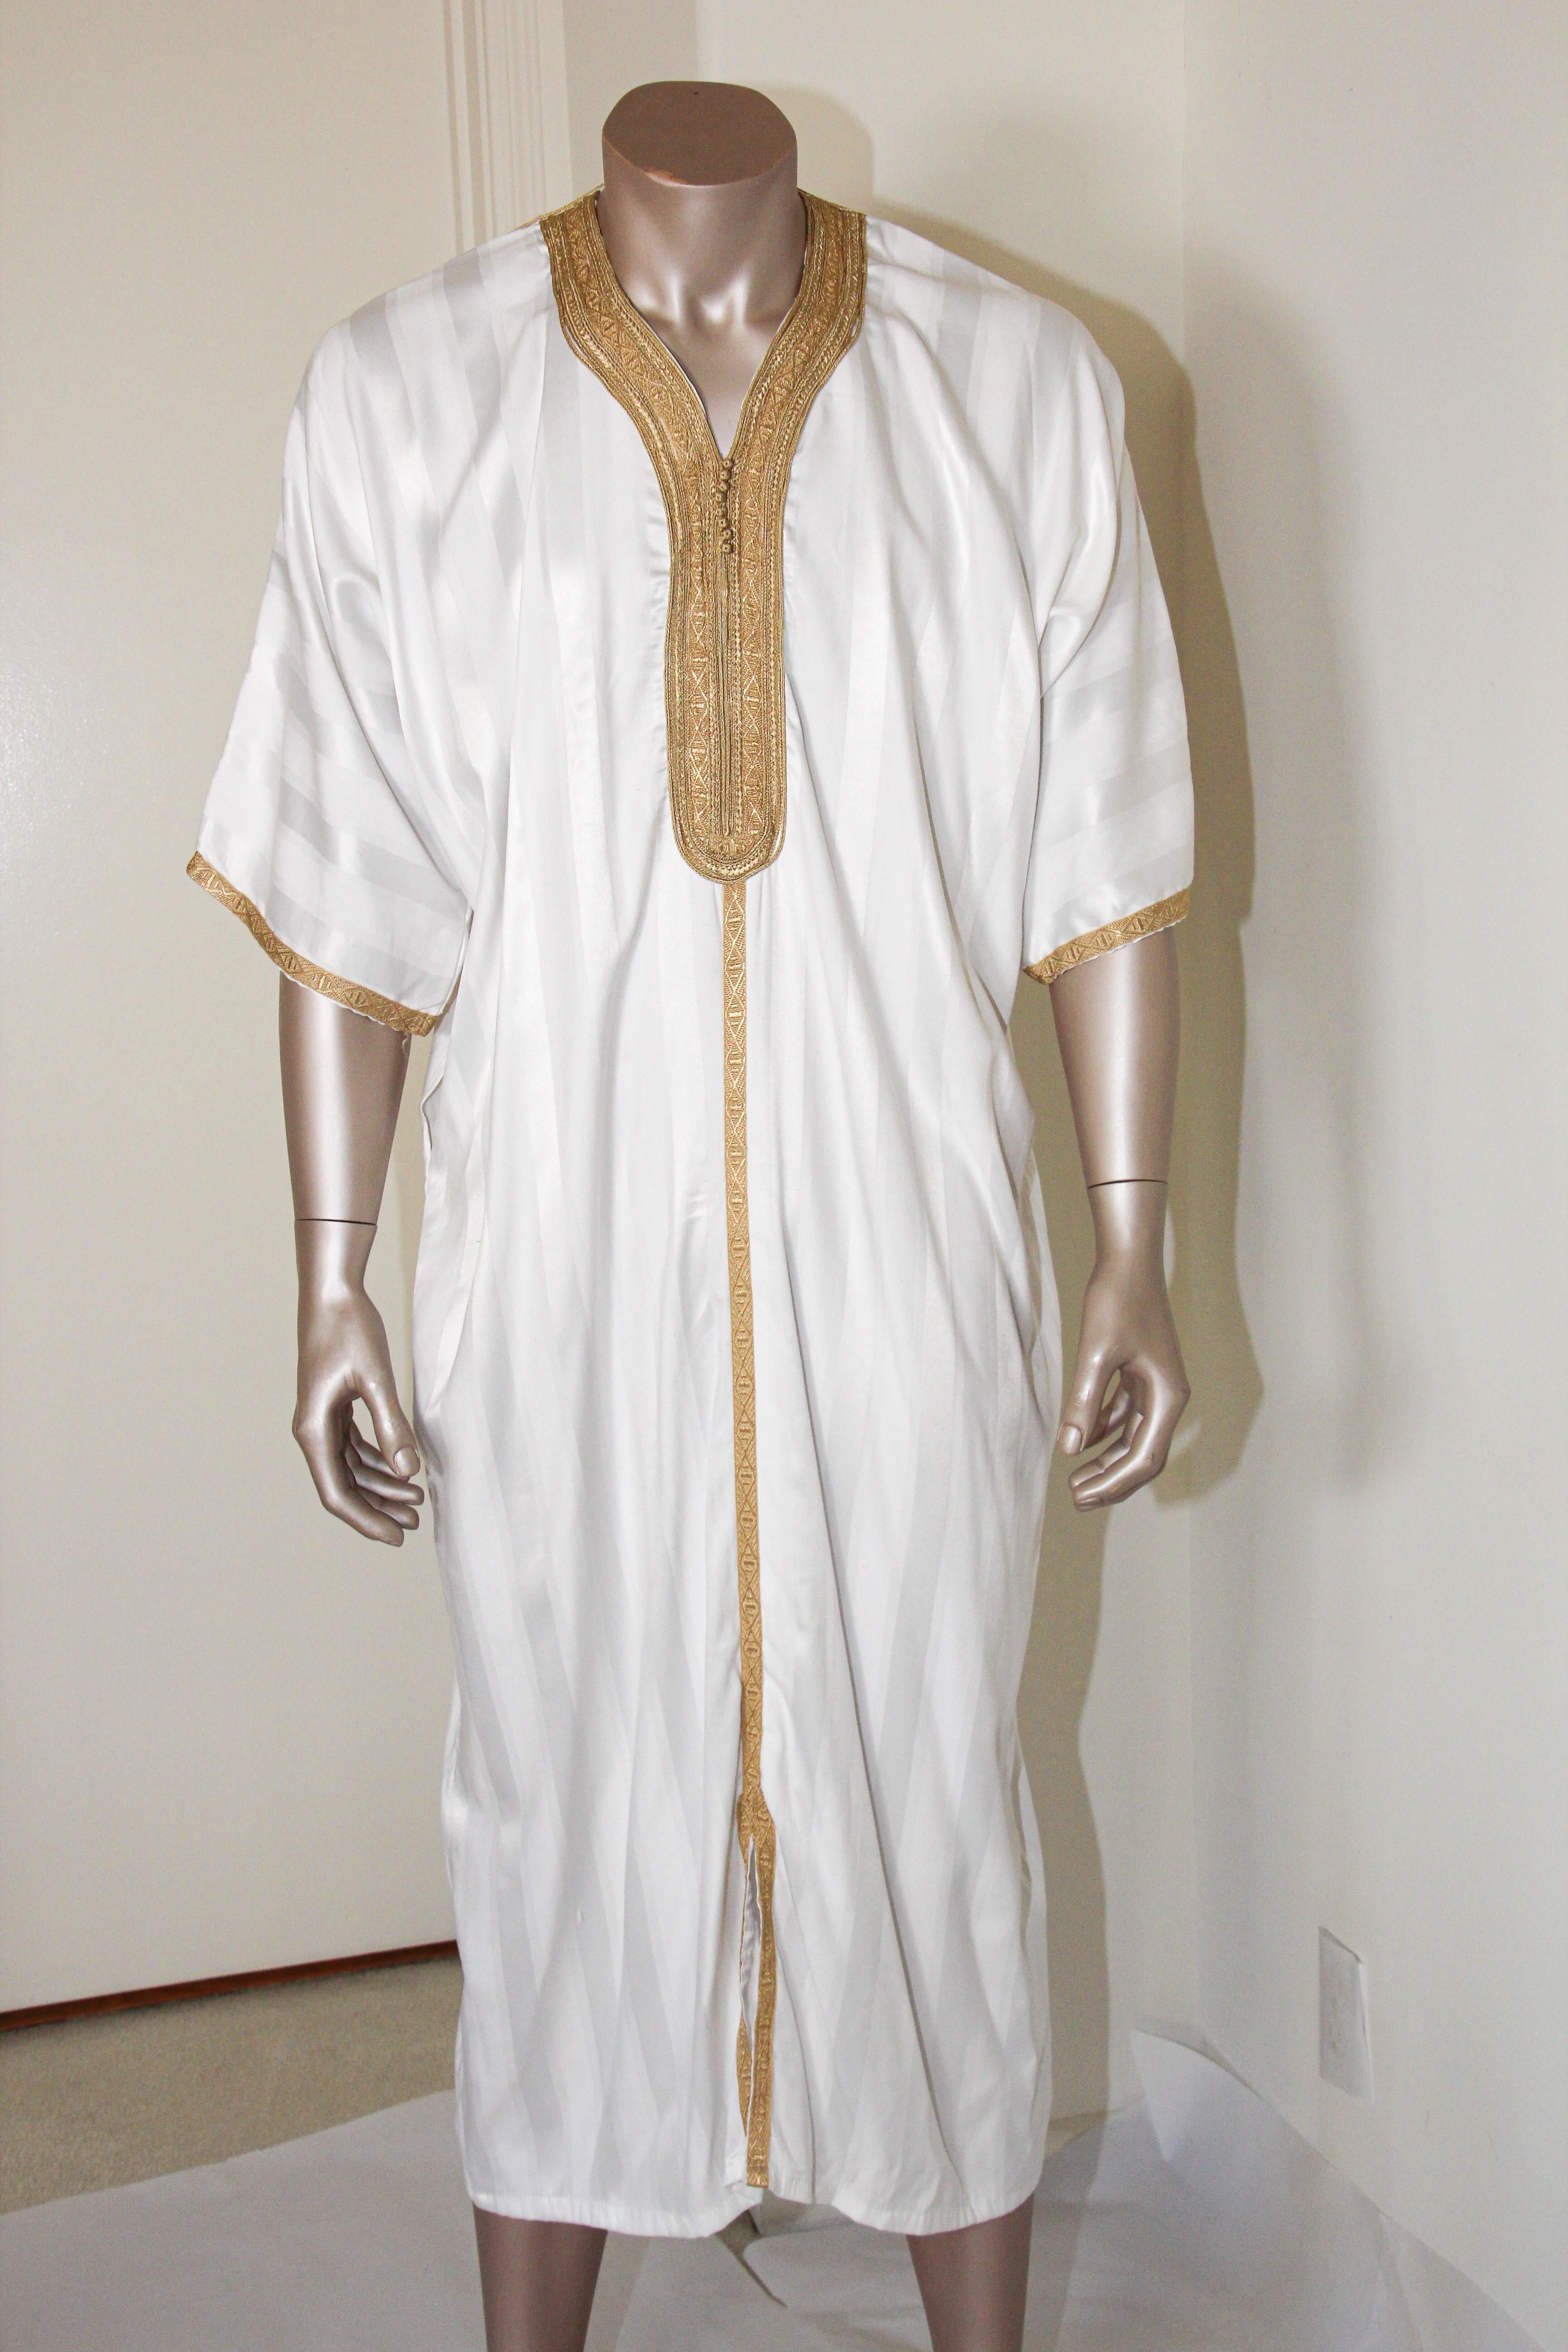 Moroccan gentleman vintage caftan embellished with gold trim.
In Morocco, fashion preserves its traditional style inherited from great civilizations that found their way to Northwest Africa, such as the Ottomans and the Moors.
Moroccan fashion has